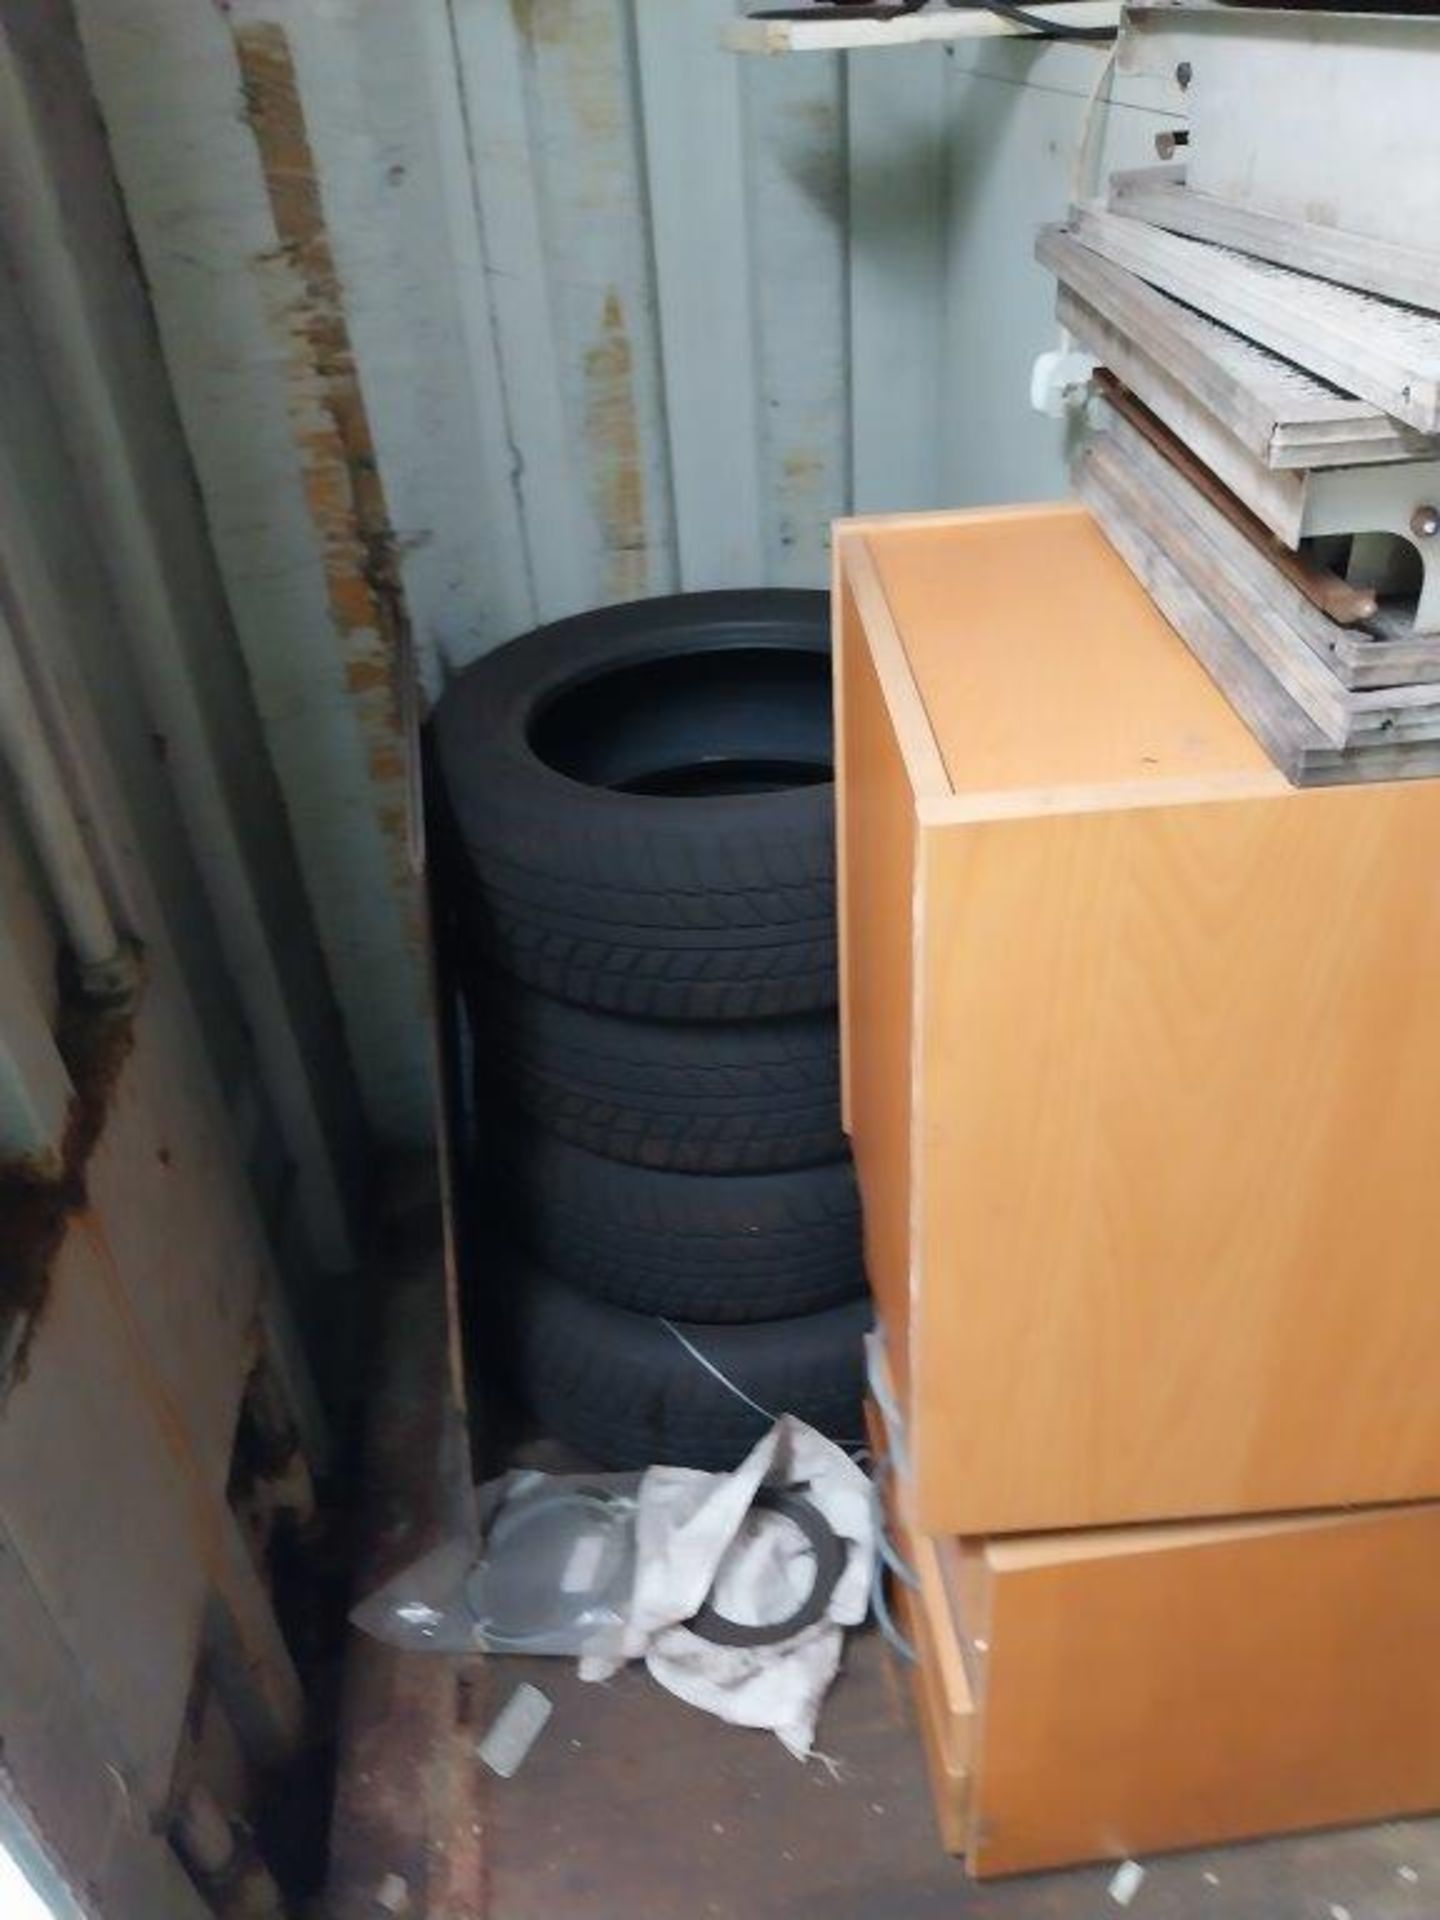 Remaining contents of container to include furniture, filing cabinets, tyres etc. - Bild 2 aus 5